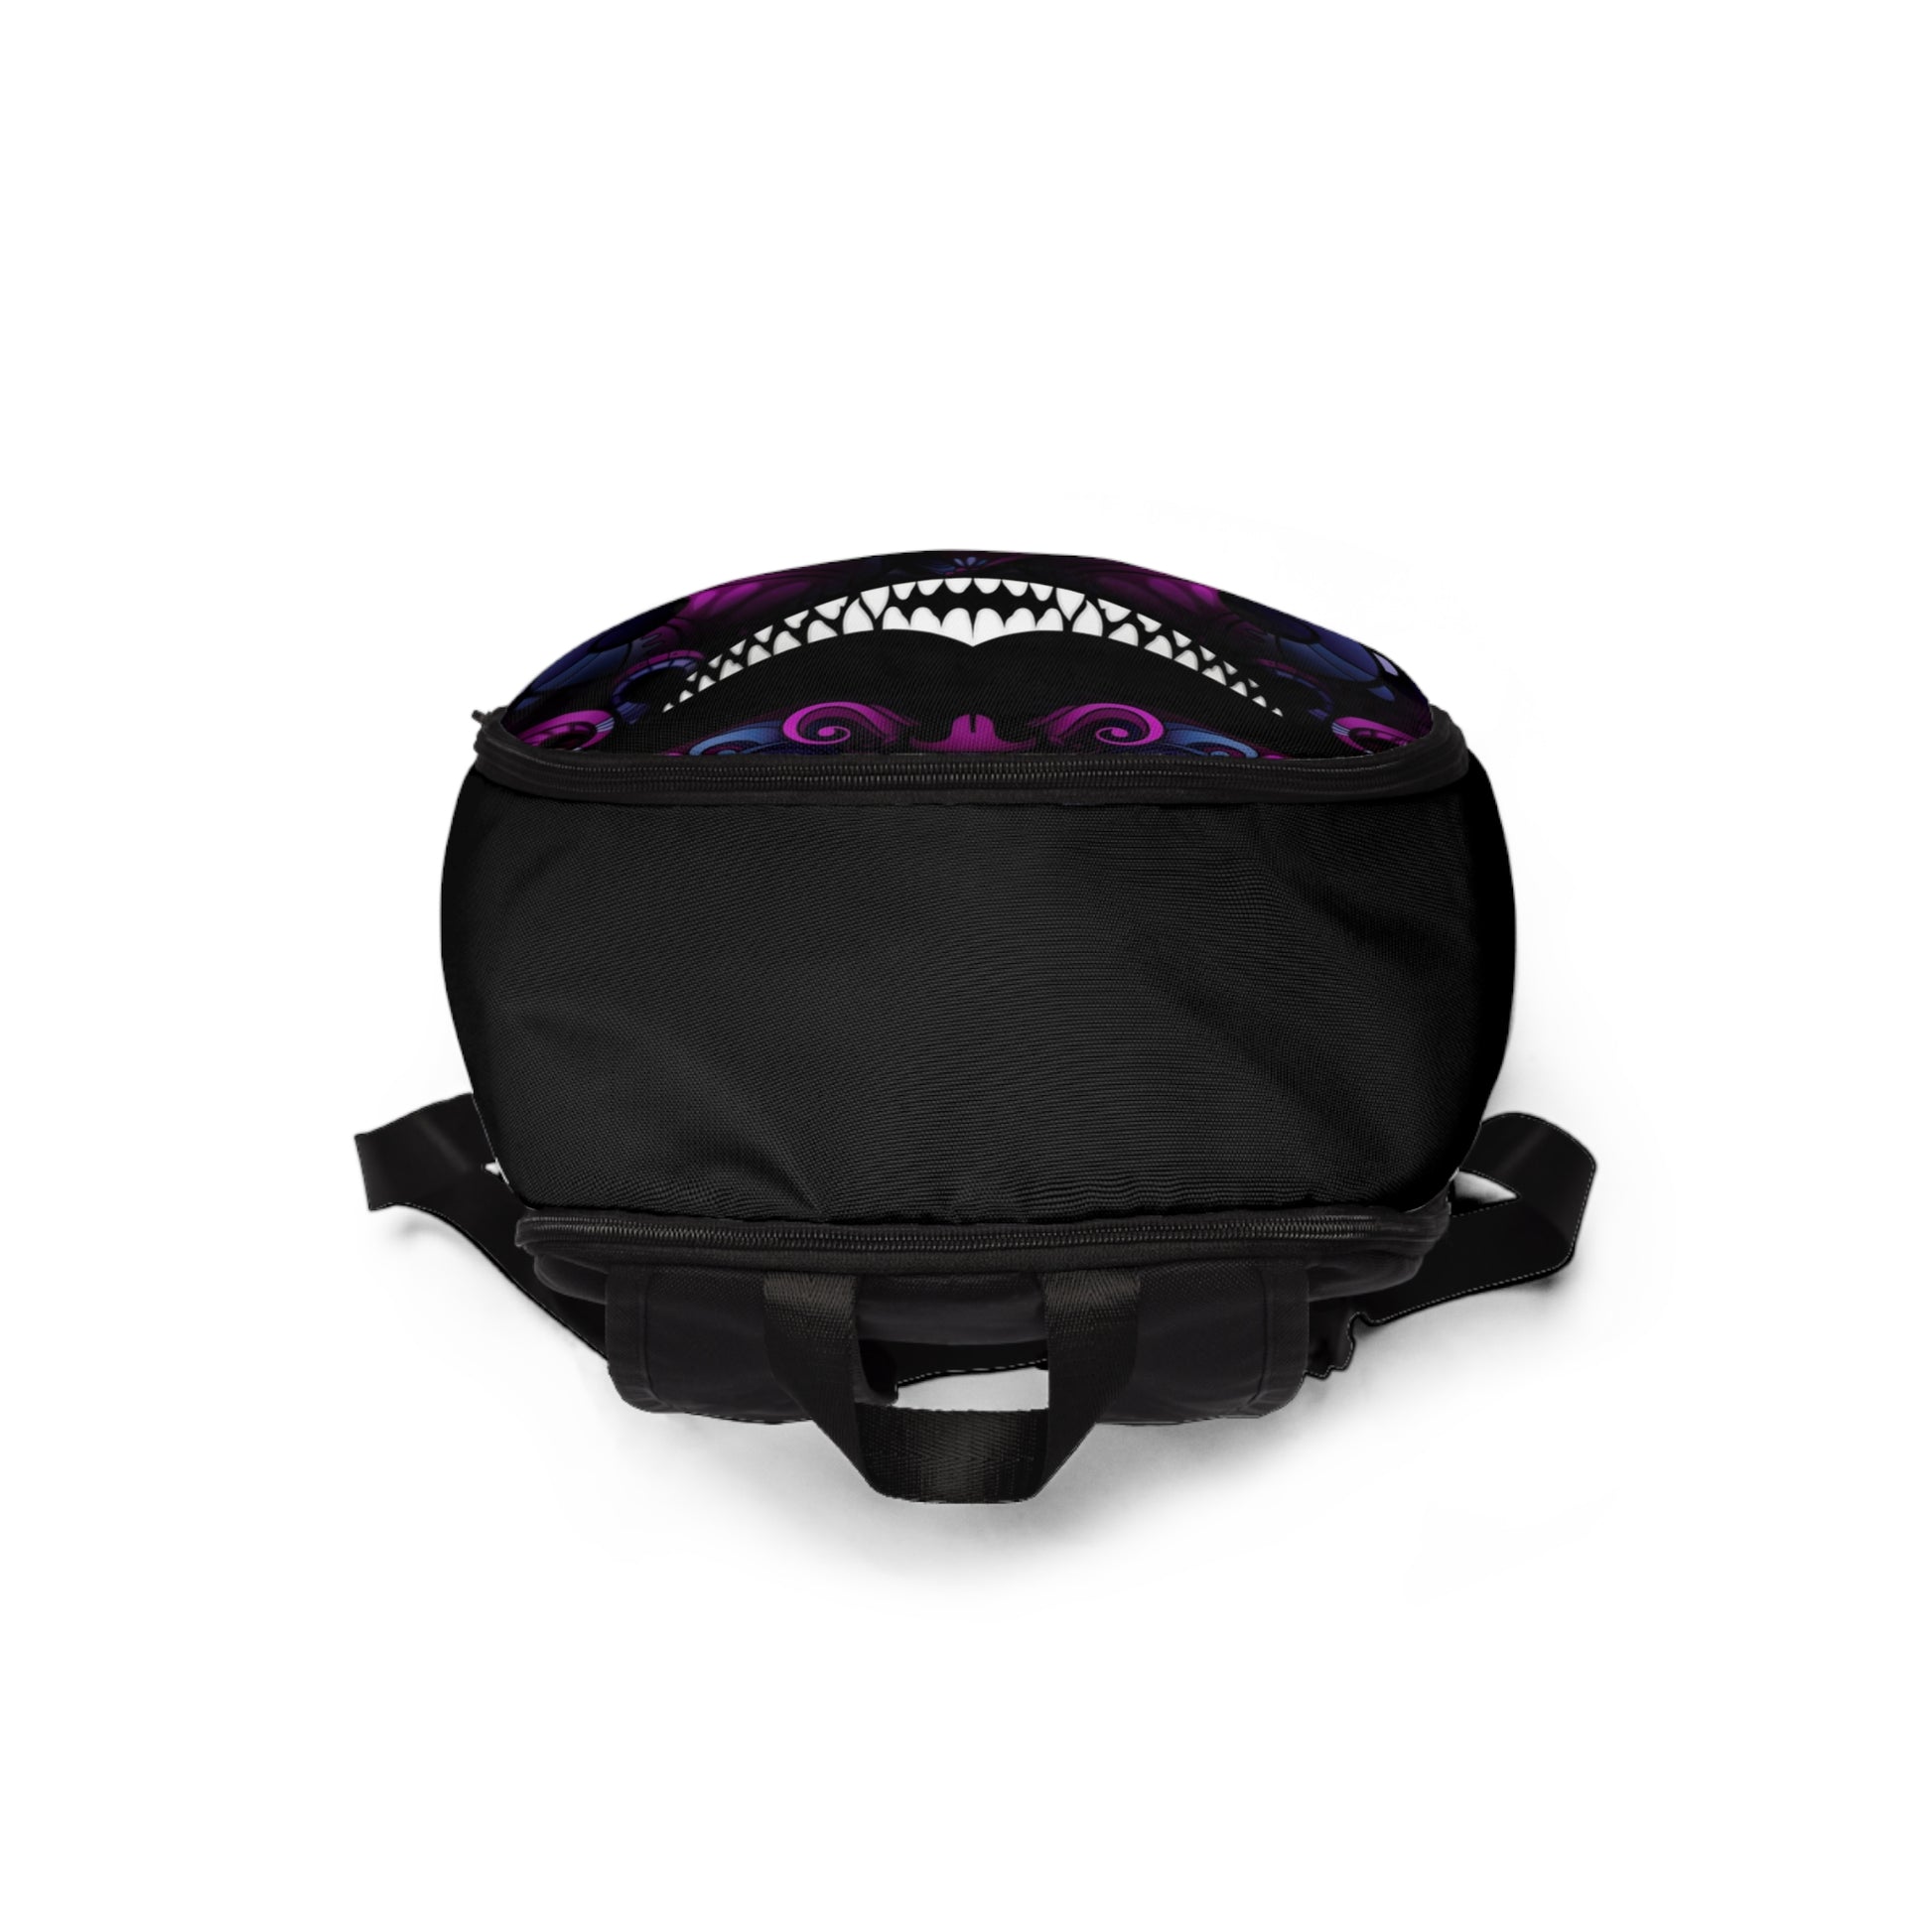 Down the Rabbit Hole Backpack, Bags, | iEDM